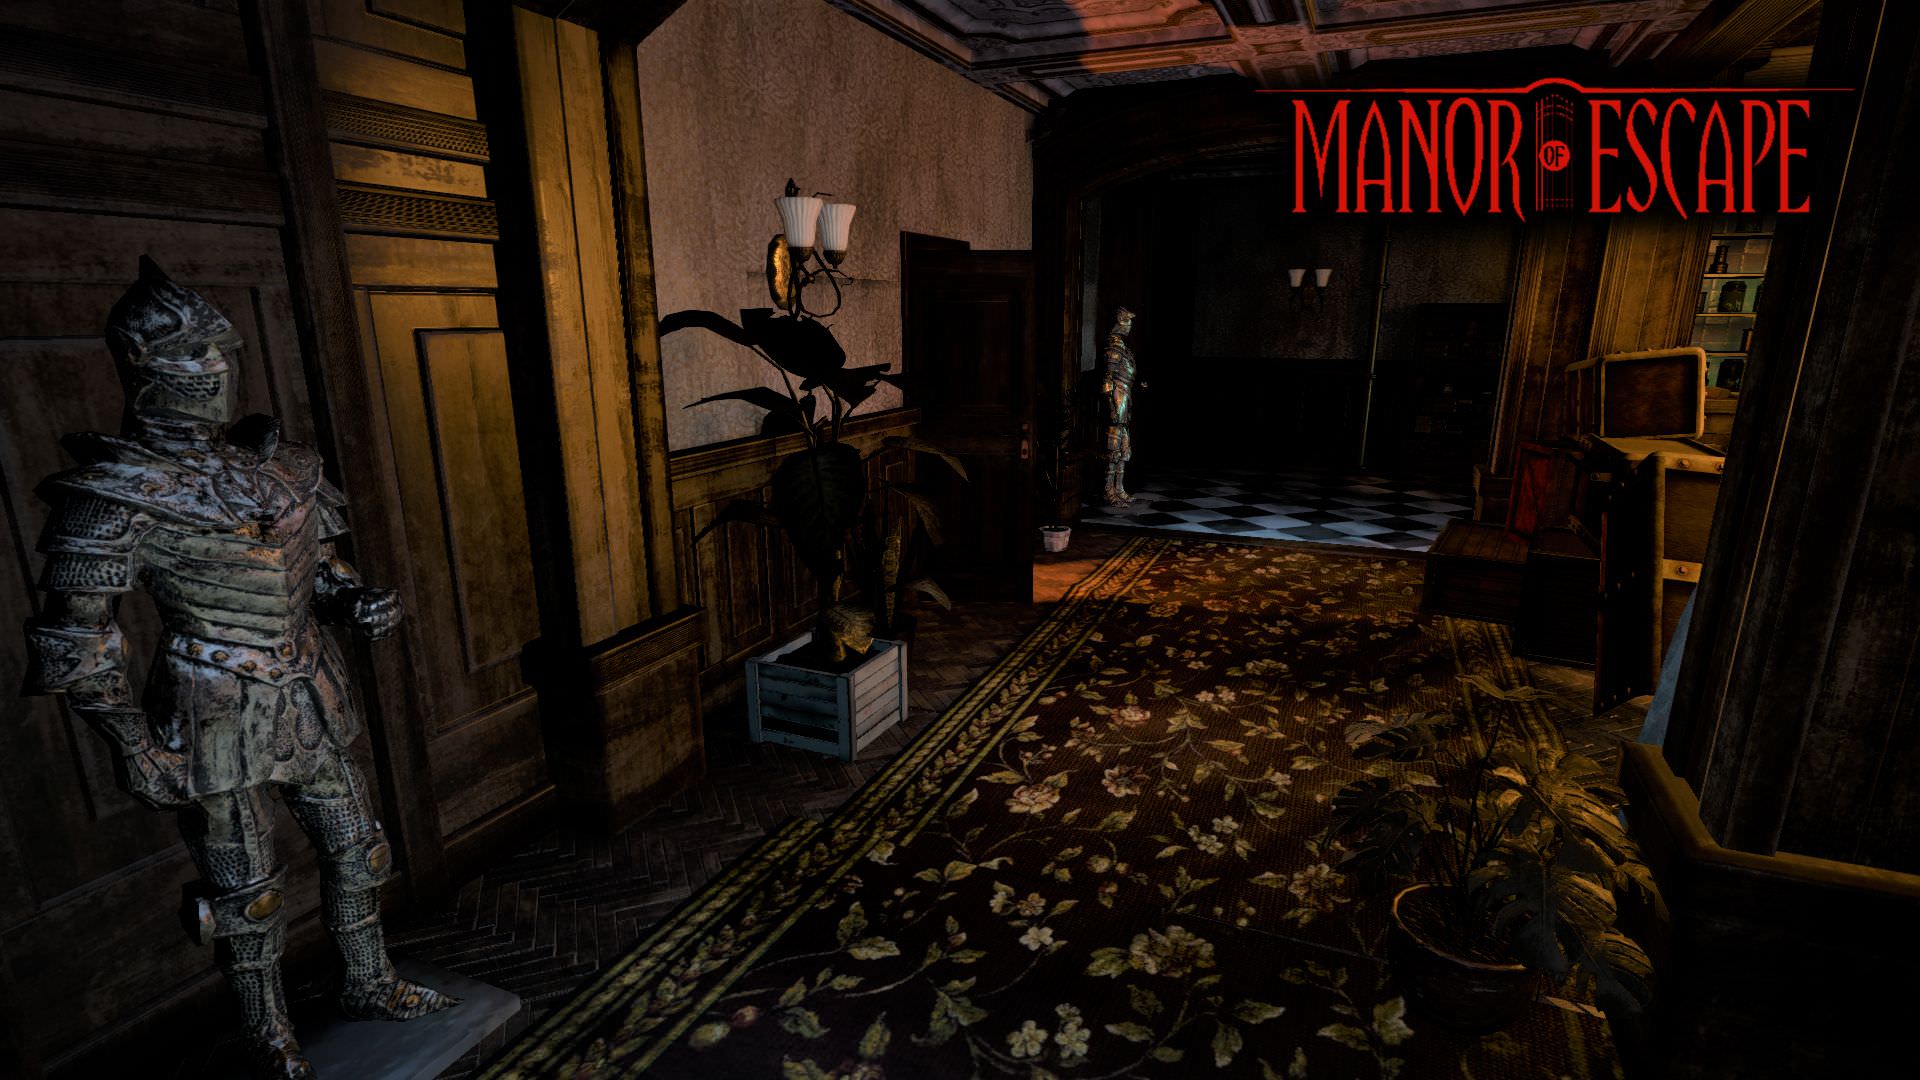 A virtual reality escape room in where players solve puzzles inside a manor and try to escape.